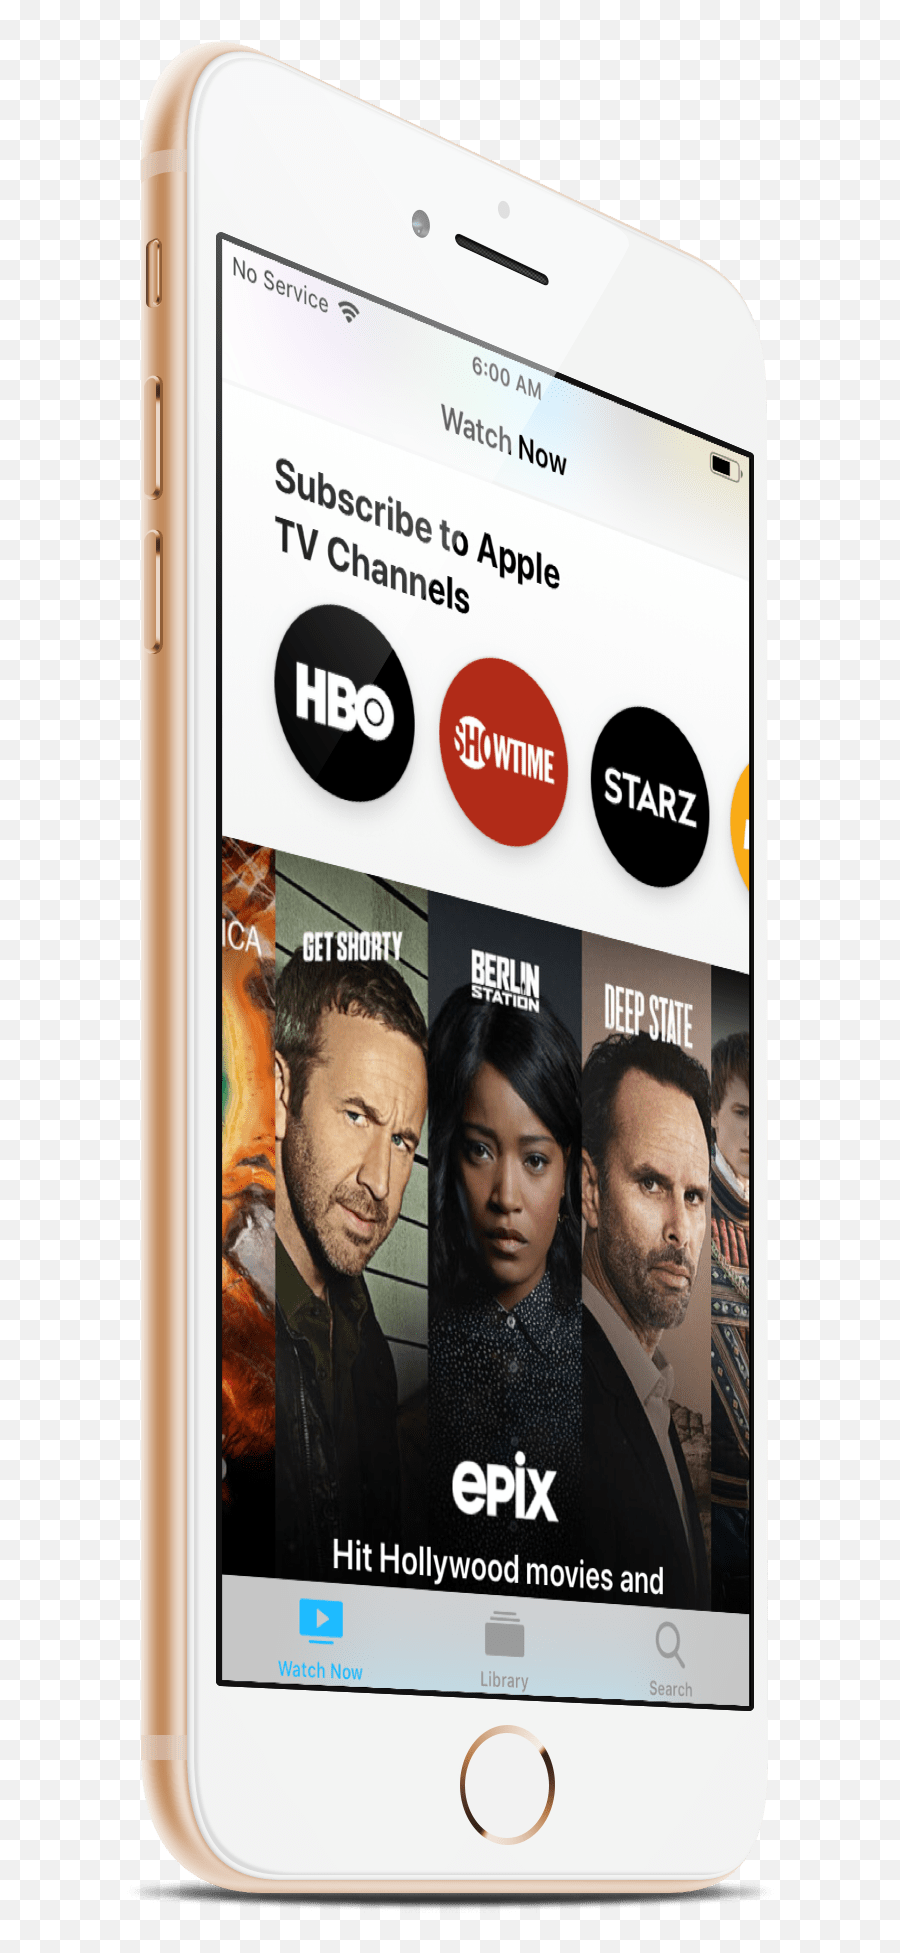 Hbo Added To Apple Tv Channels In Latest Ios Beta Average - Sharing Emoji,Apple Tv Logo